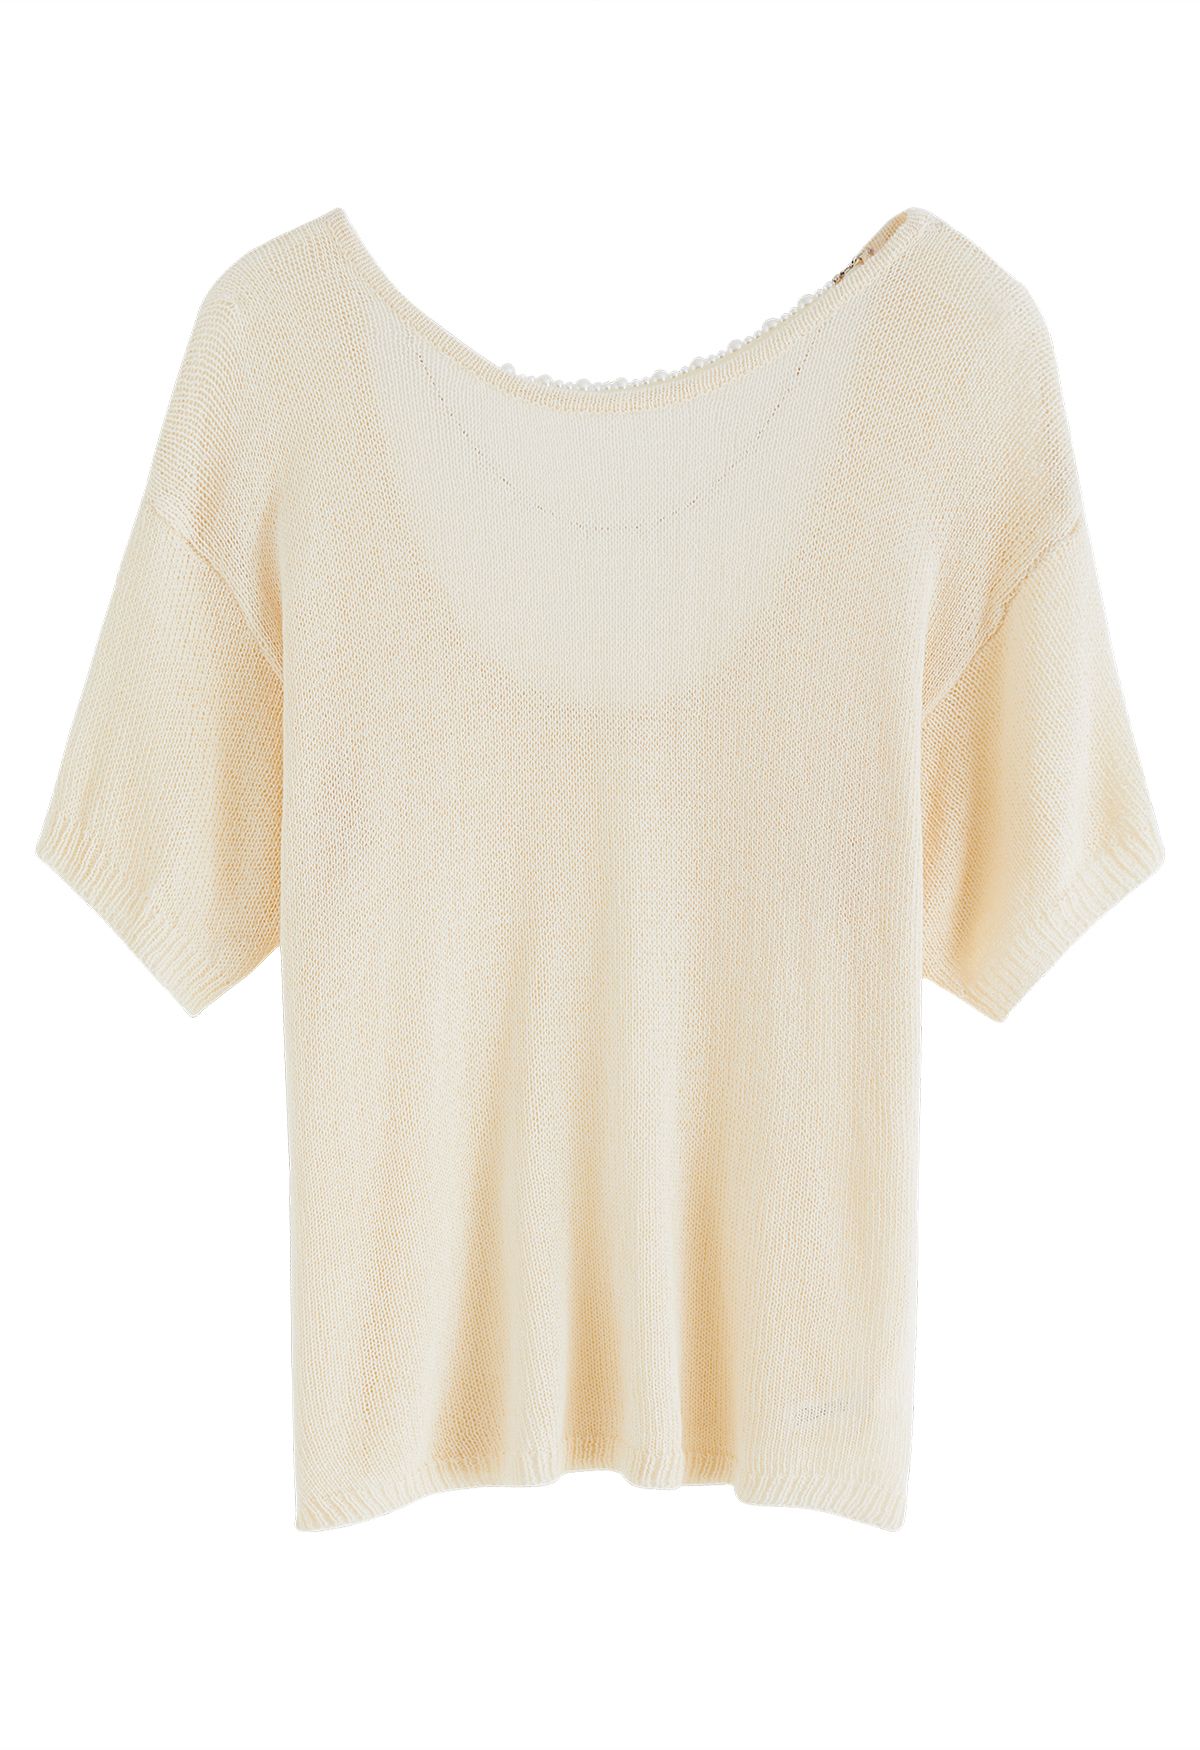 Pearl Necklace Short Sleeve Knit Top in Cream